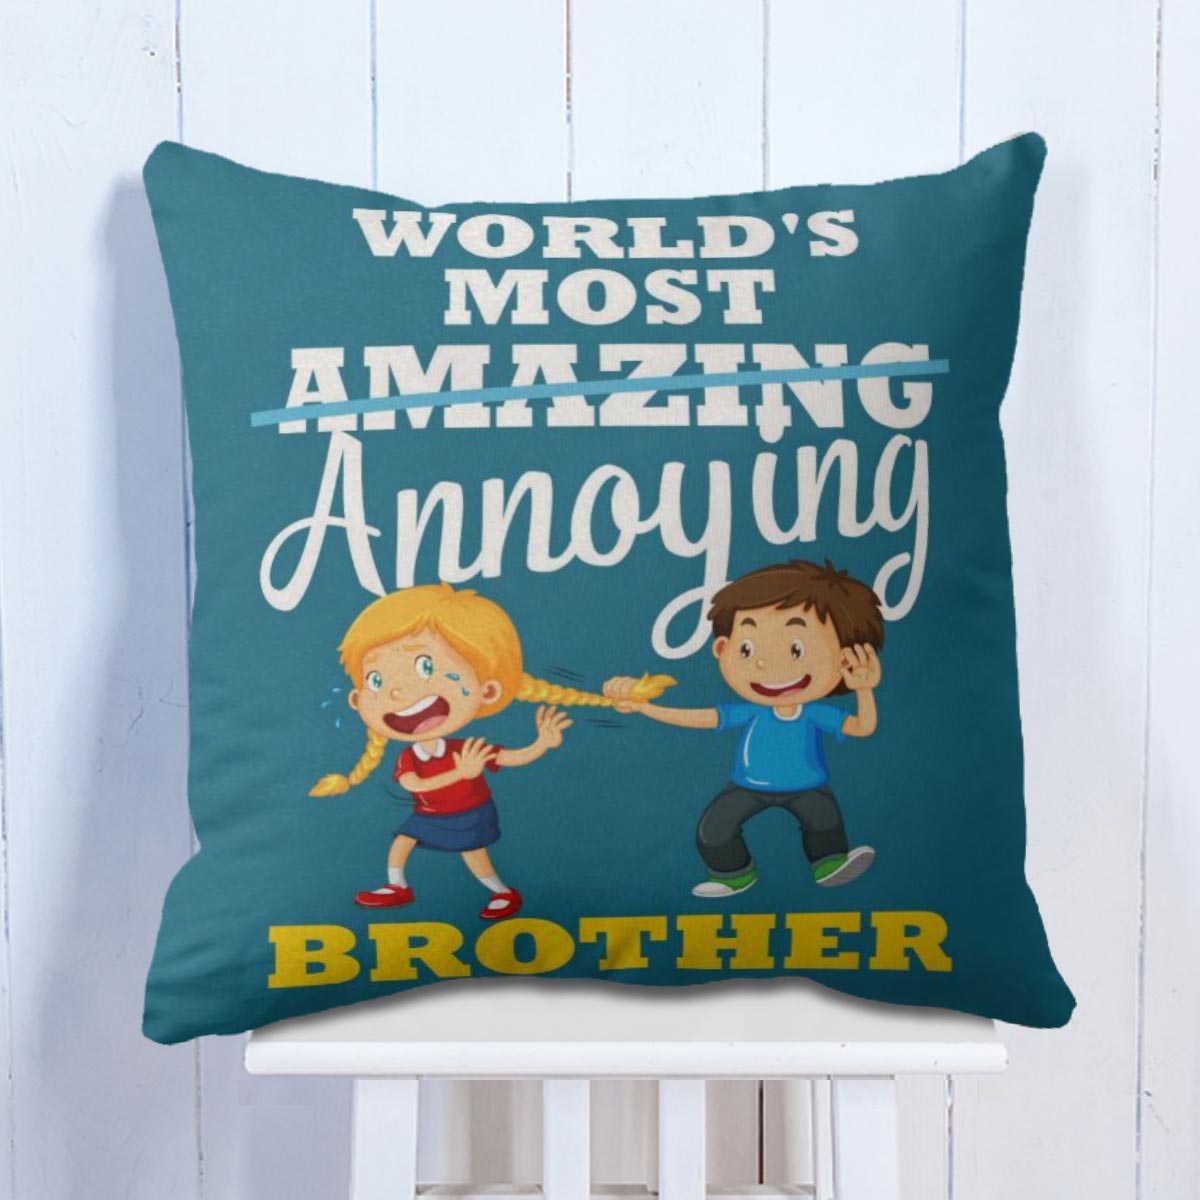 Personalized Satin Pillow for Sisters: Gift/Send Bhaidooj Gifts Online  J11114570 |IGP.com